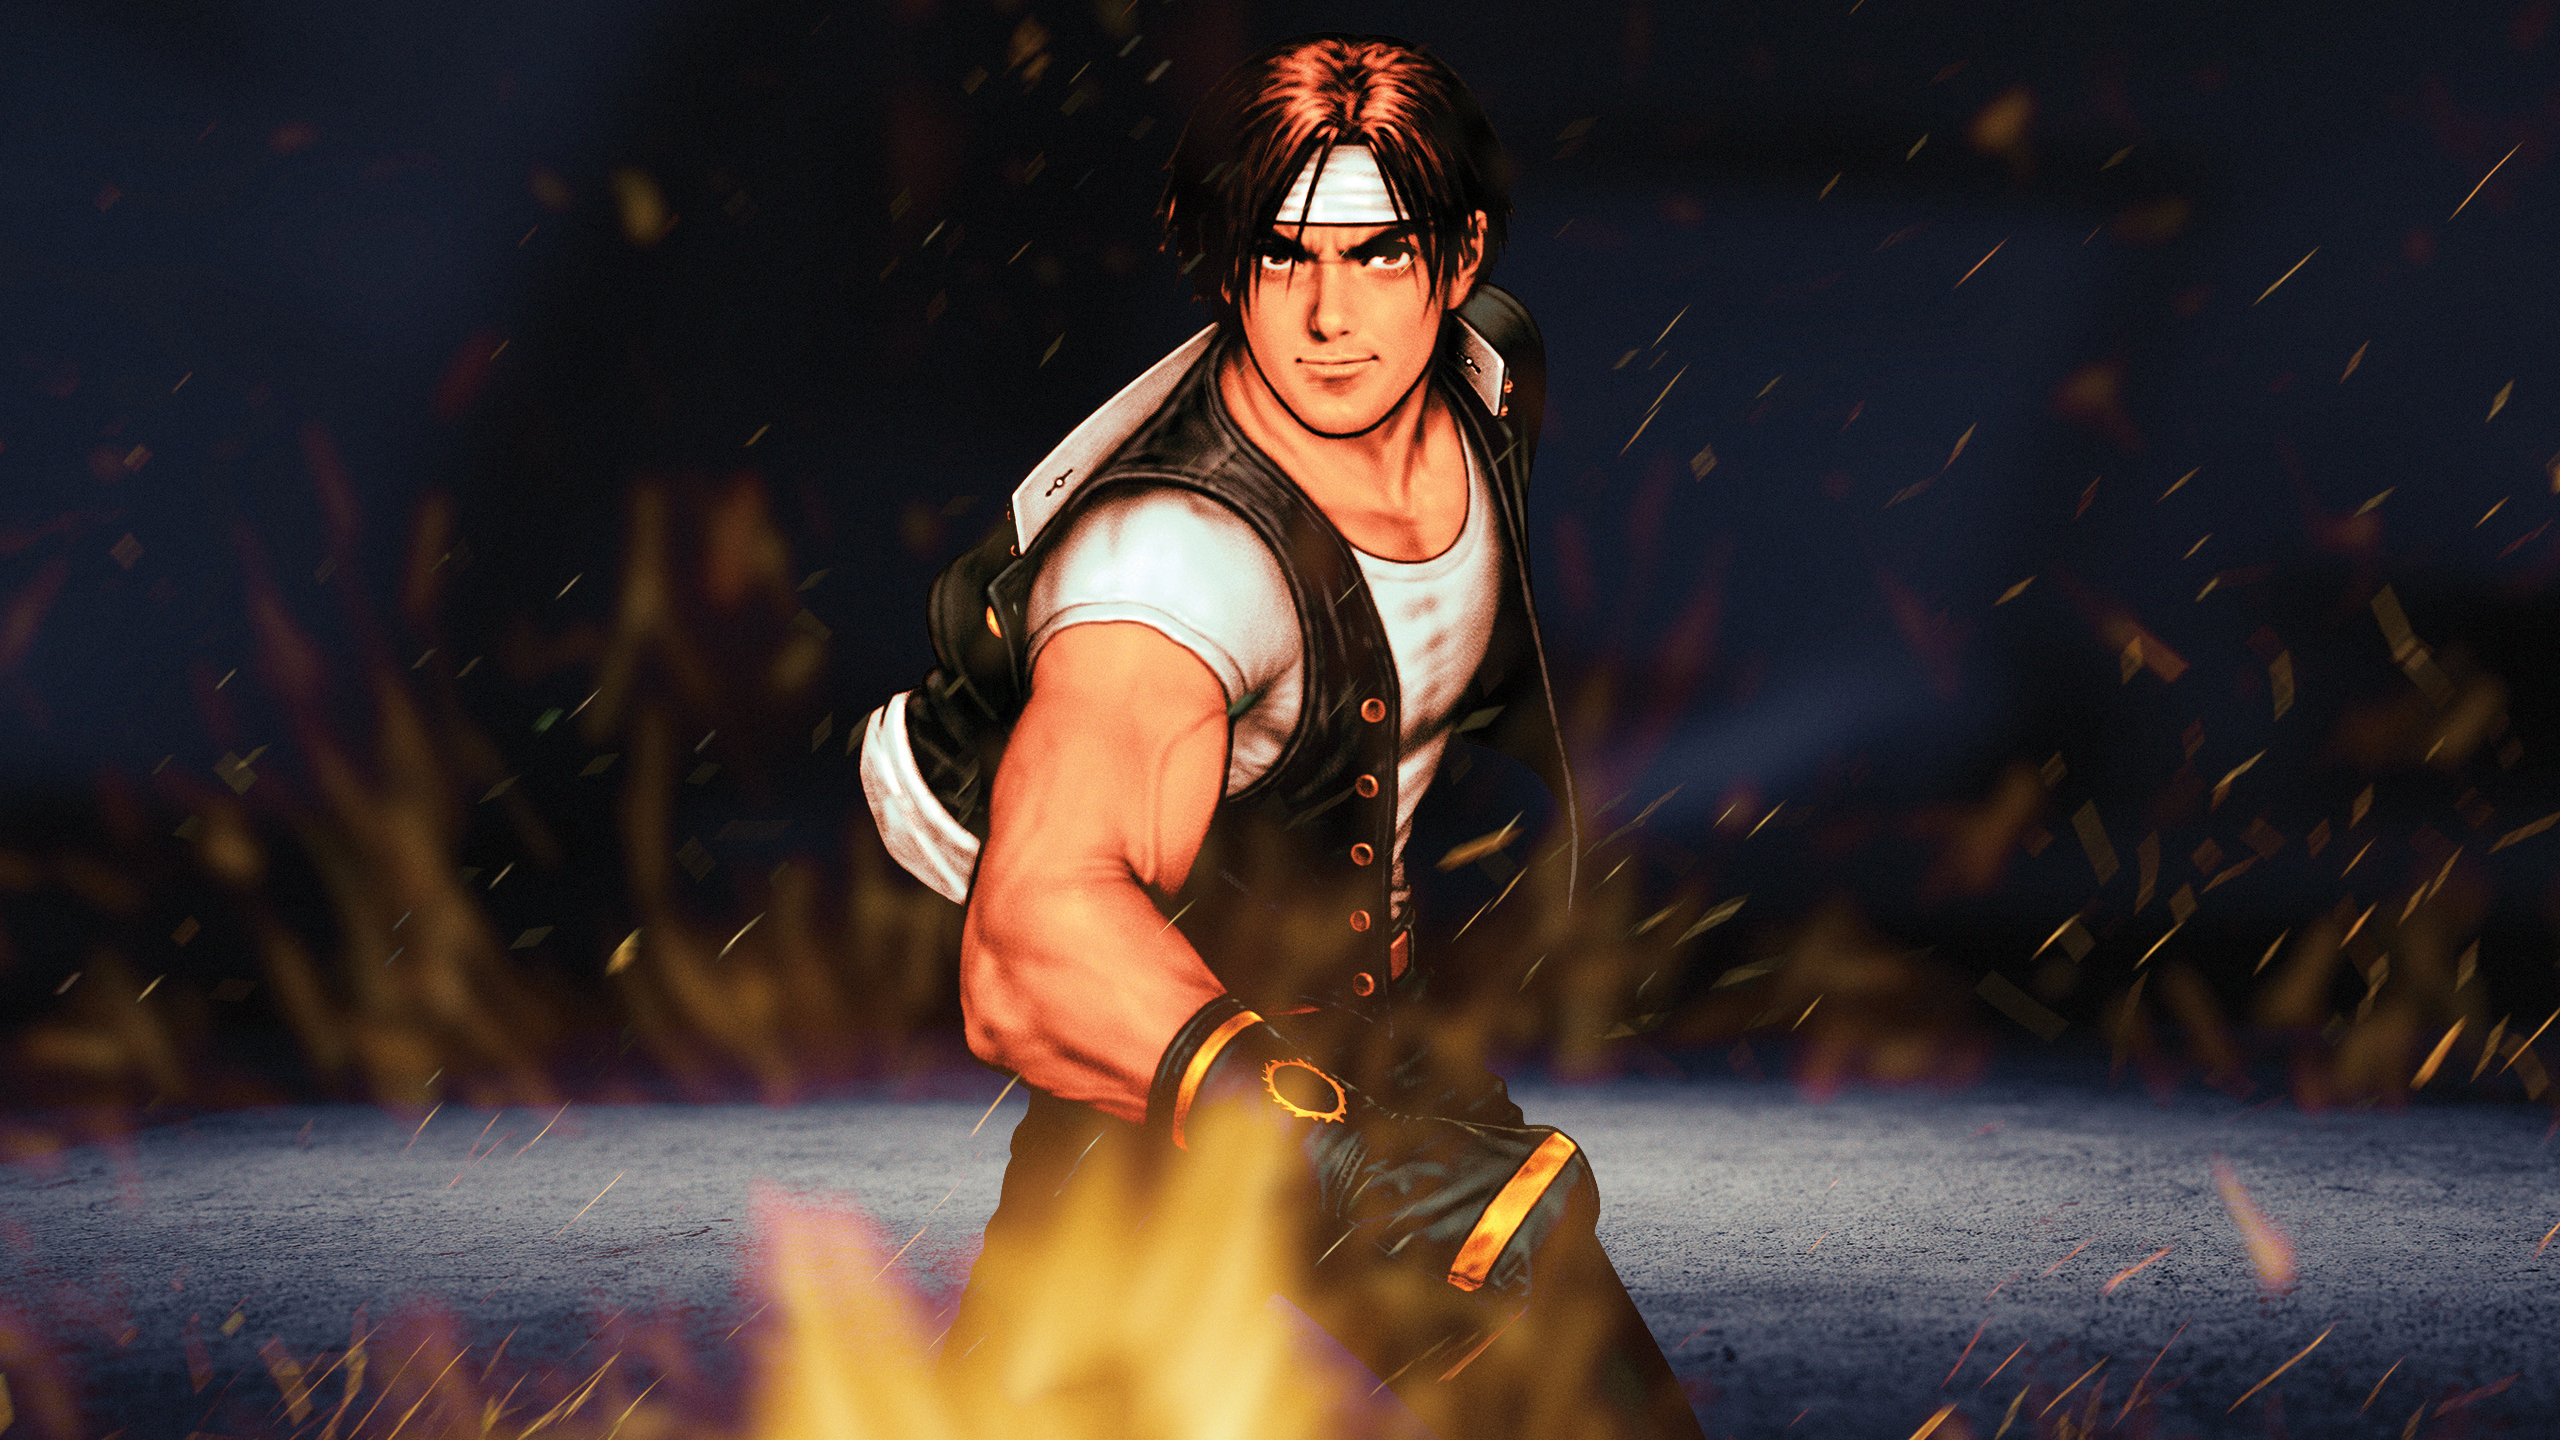 King Of Fighters Kyo Kusanagi Anime Boys Anime Muscles Warrior Video Games 2560x1440